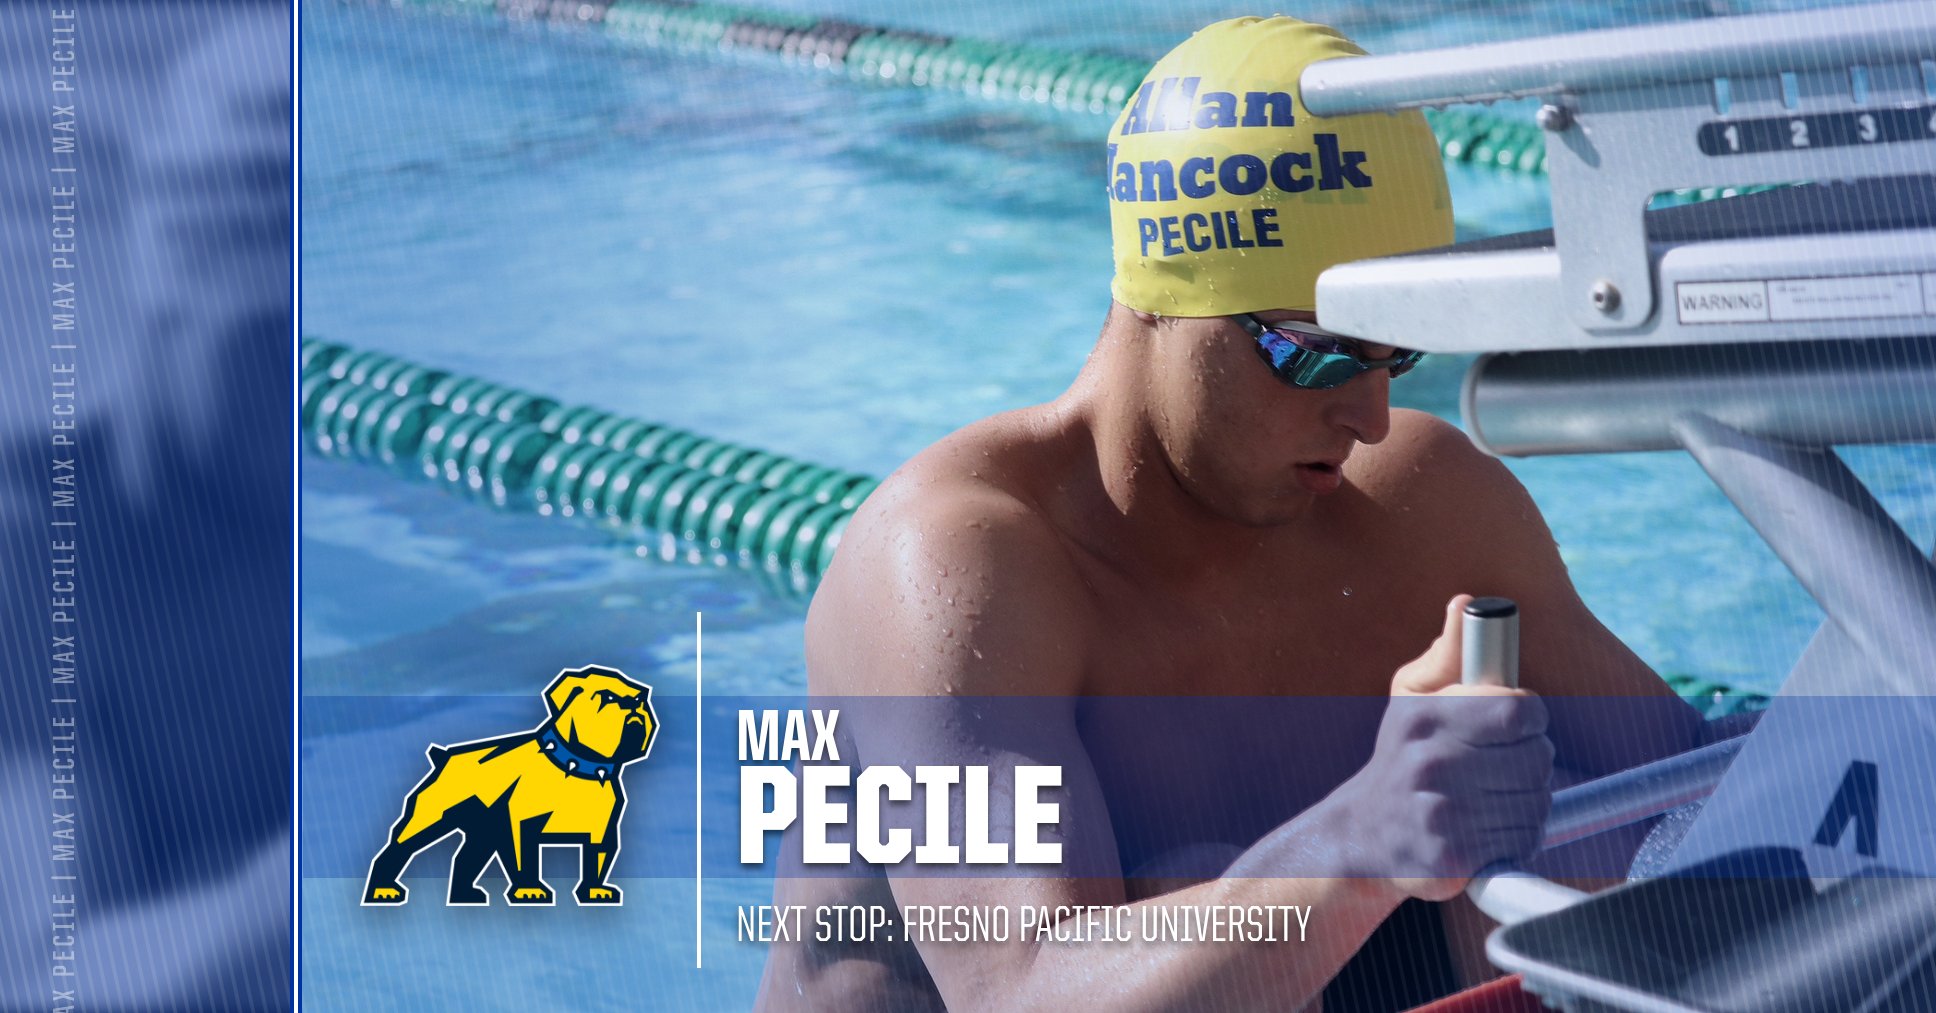 Men's Swimming: Max Pecile Signs with Fresno Pacific